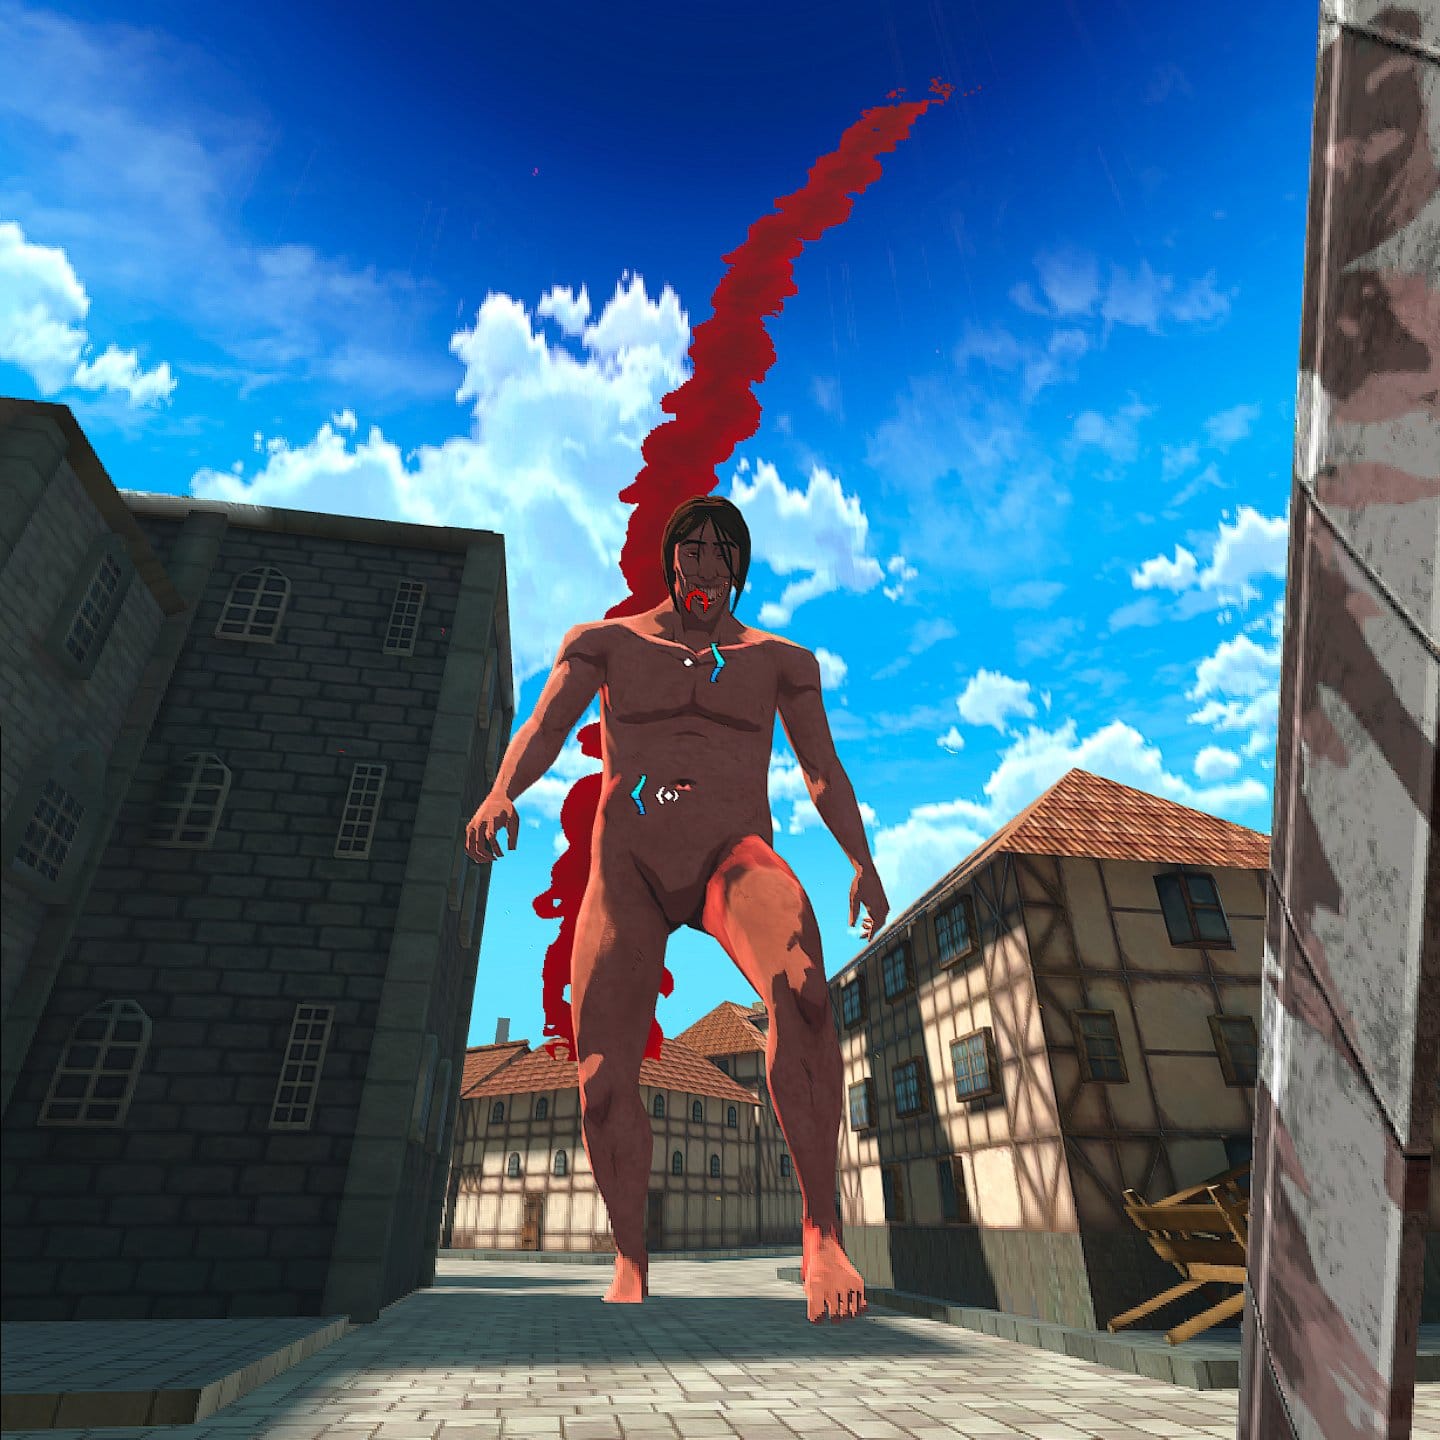 Attack on Titan VR: Unbreakable screenshot shows an abnormal titan heading towards you